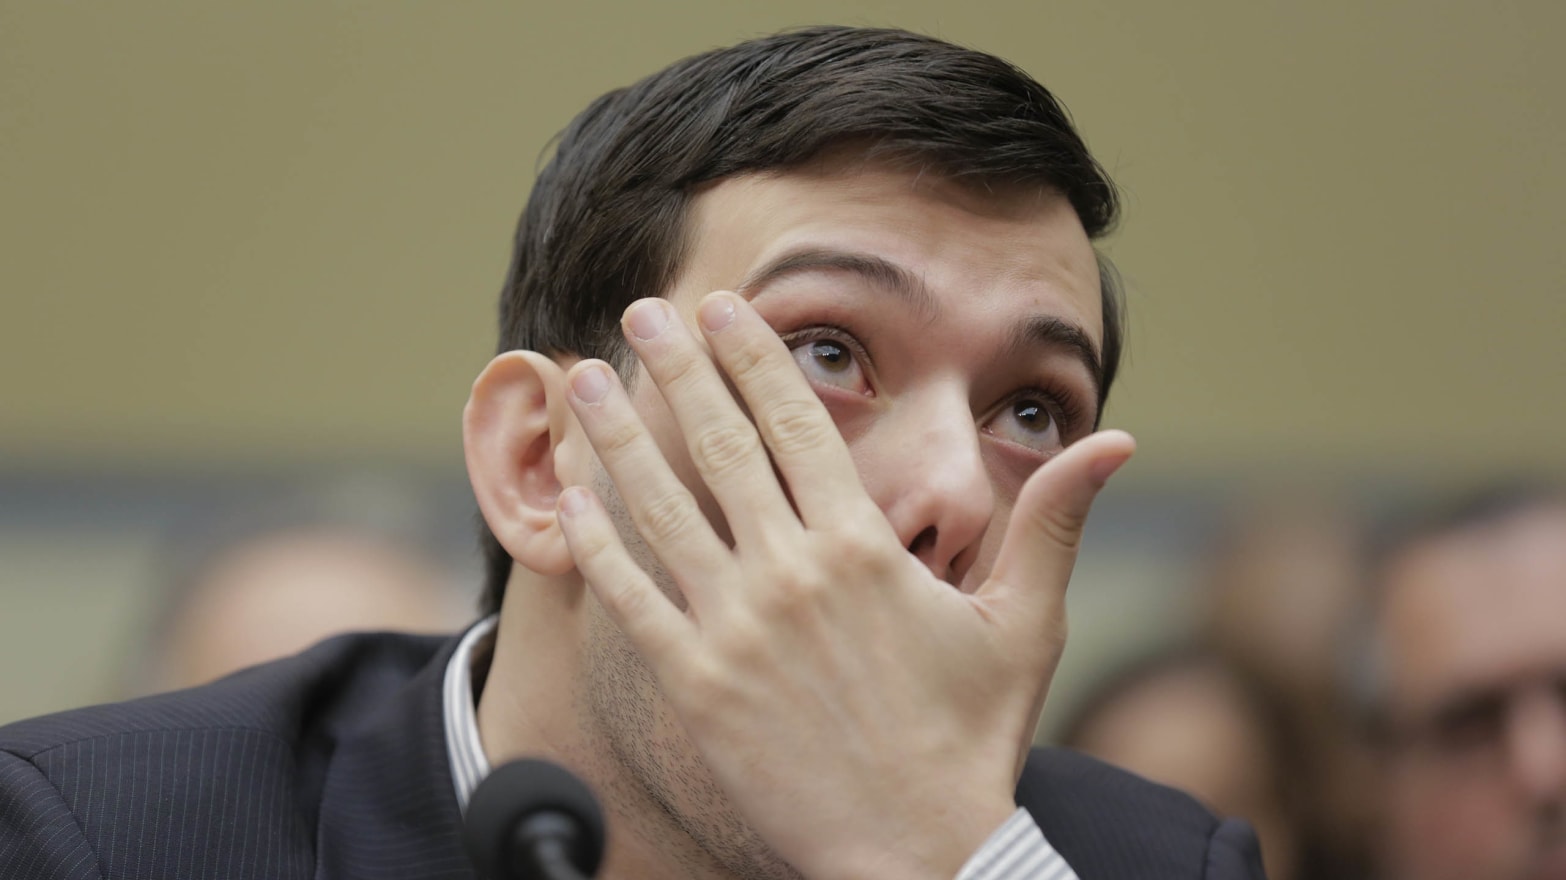 From Hedge Funds to Pharmaceuticals: The Wealth of Martin Shkreli